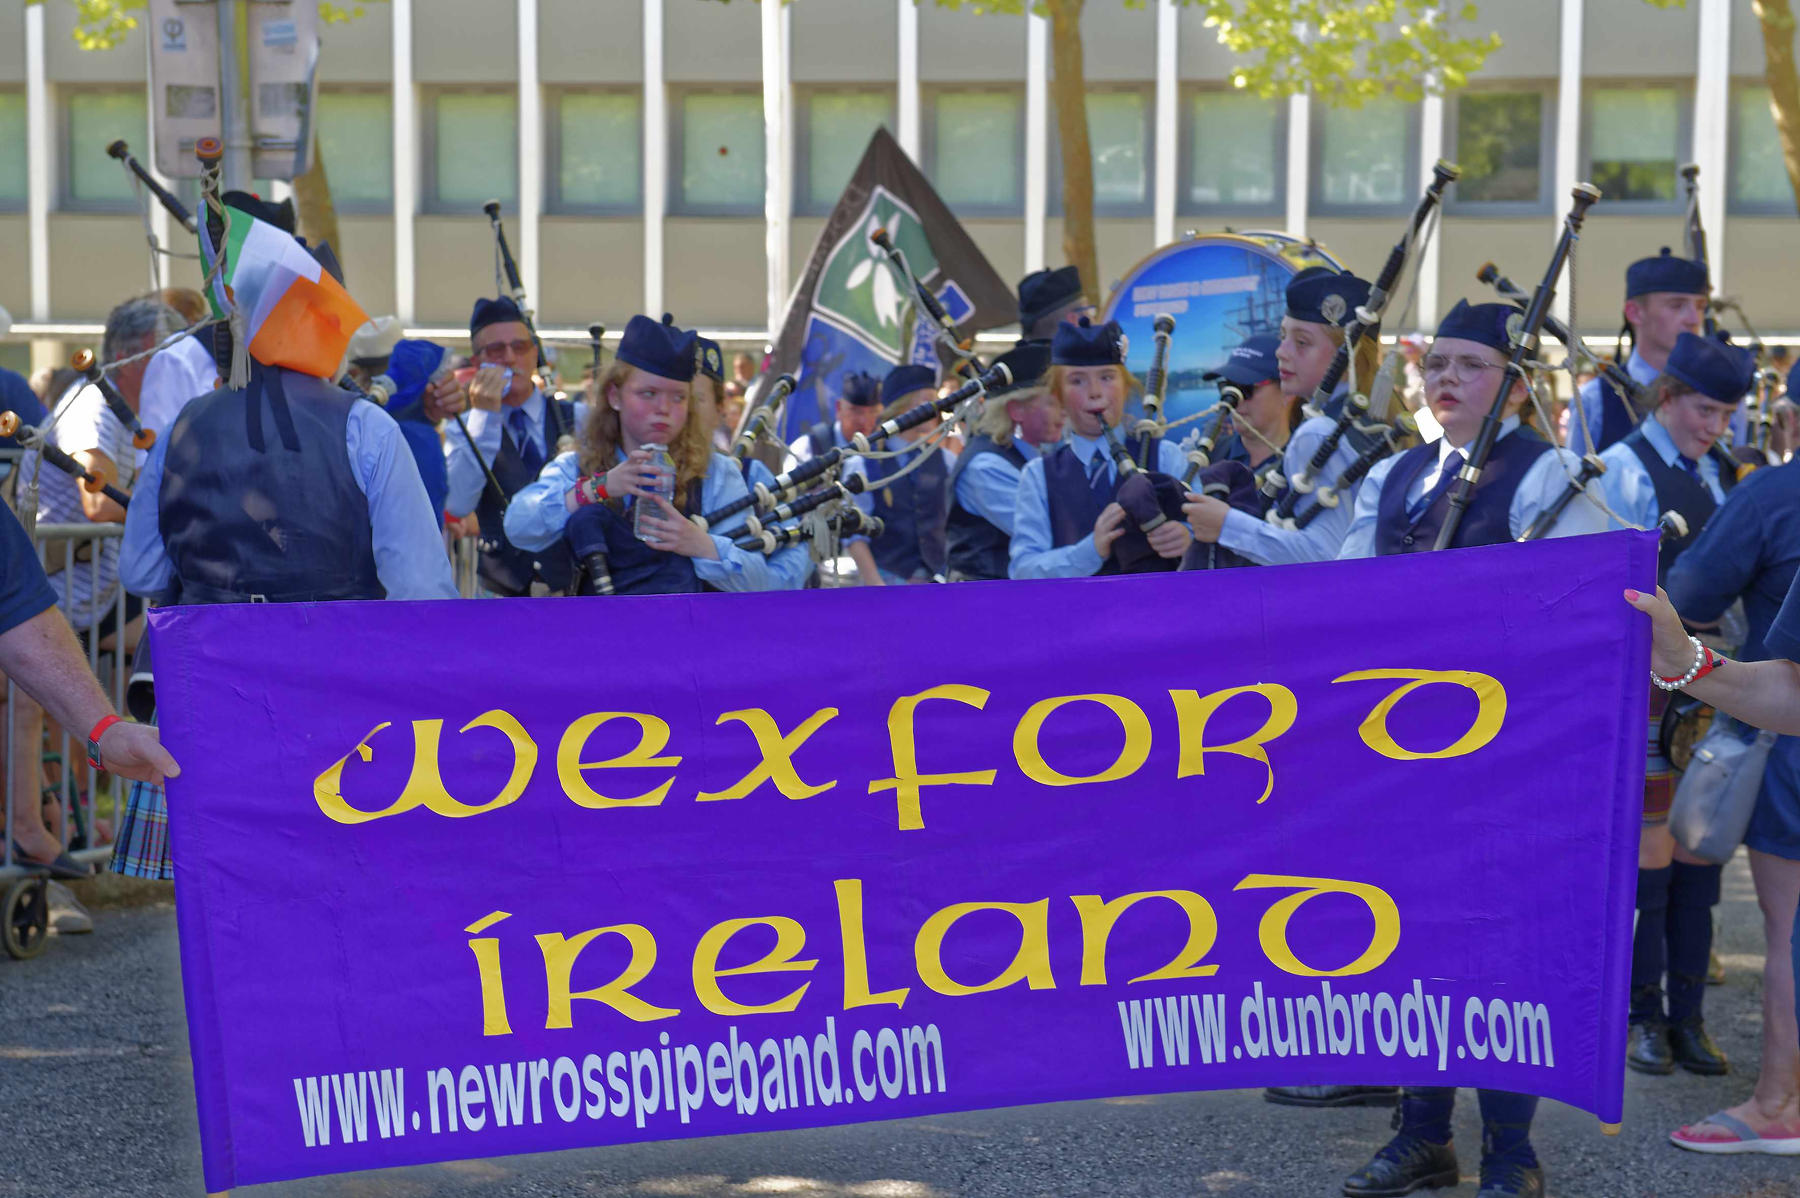 interceltique-2018-image13185-new-ross-and-district-pipe-band-d-irlande